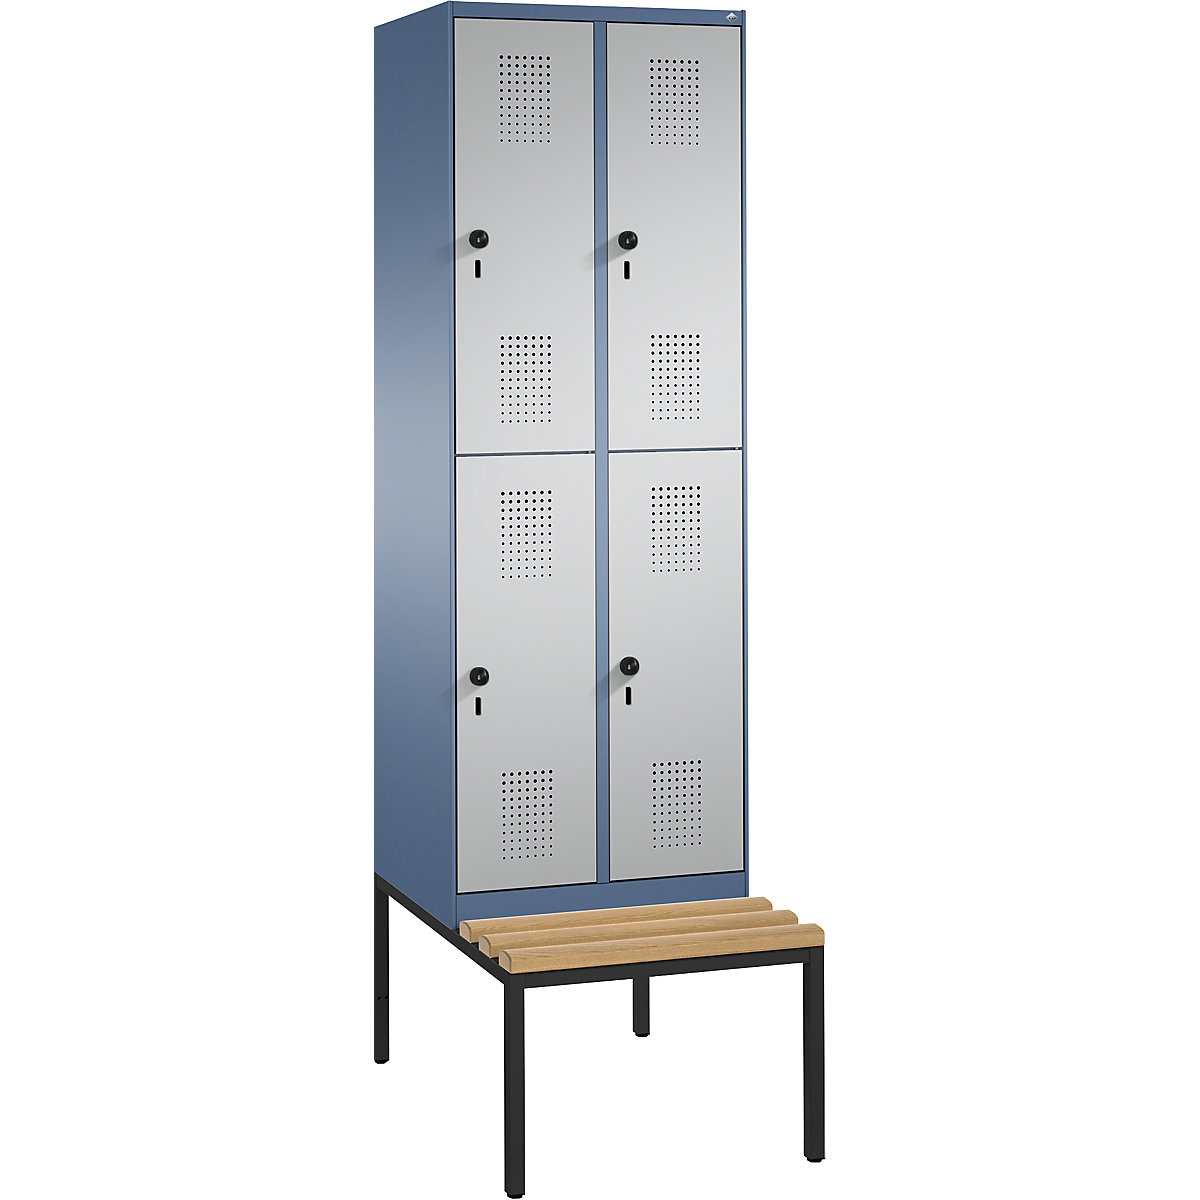 EVOLO cloakroom locker, double tier, with bench – C+P, 2 compartments, 2 shelf compartments each, compartment width 300 mm, distant blue / white aluminium-4